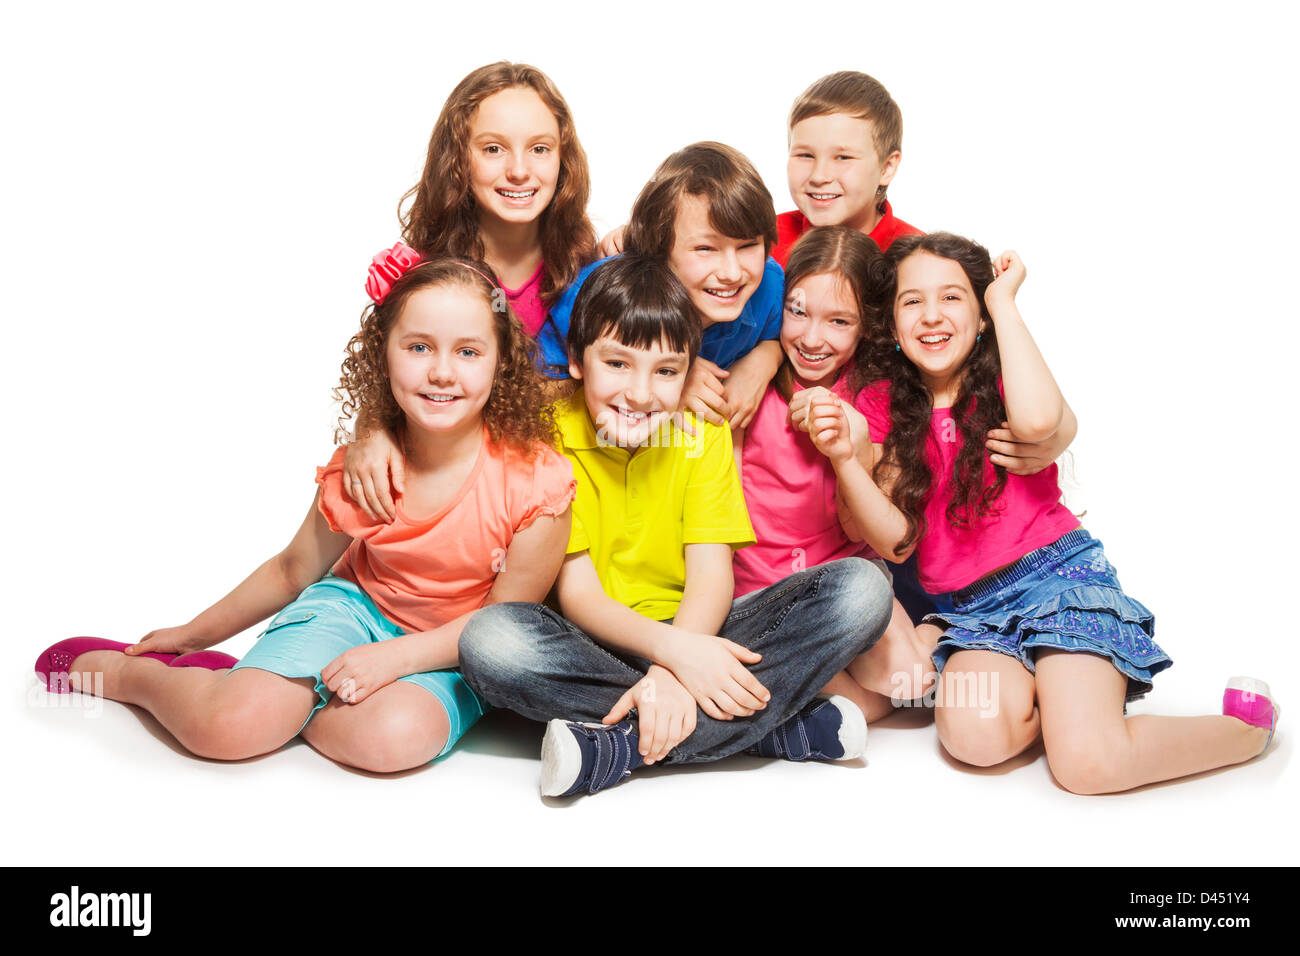 Group of happy kids sitting together hugging and smilng Stock Photo